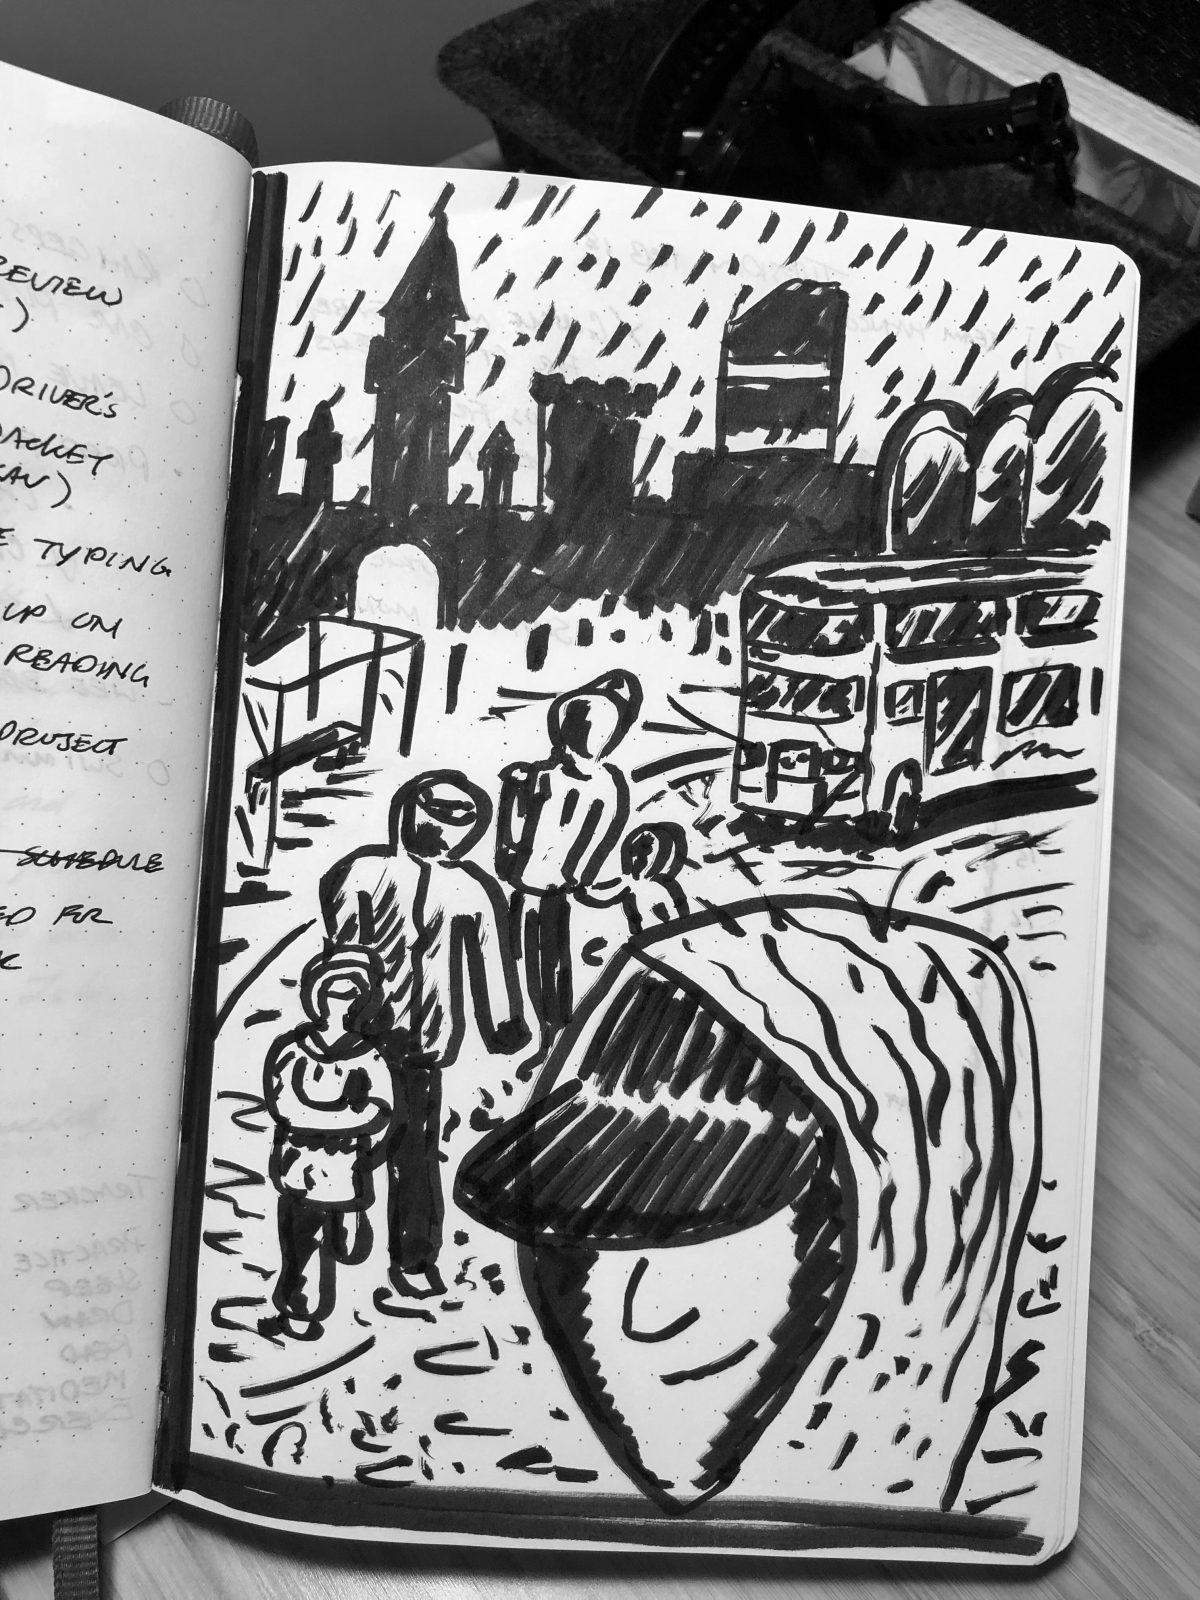 Standing in the rain waiting for a bus. Illustration.